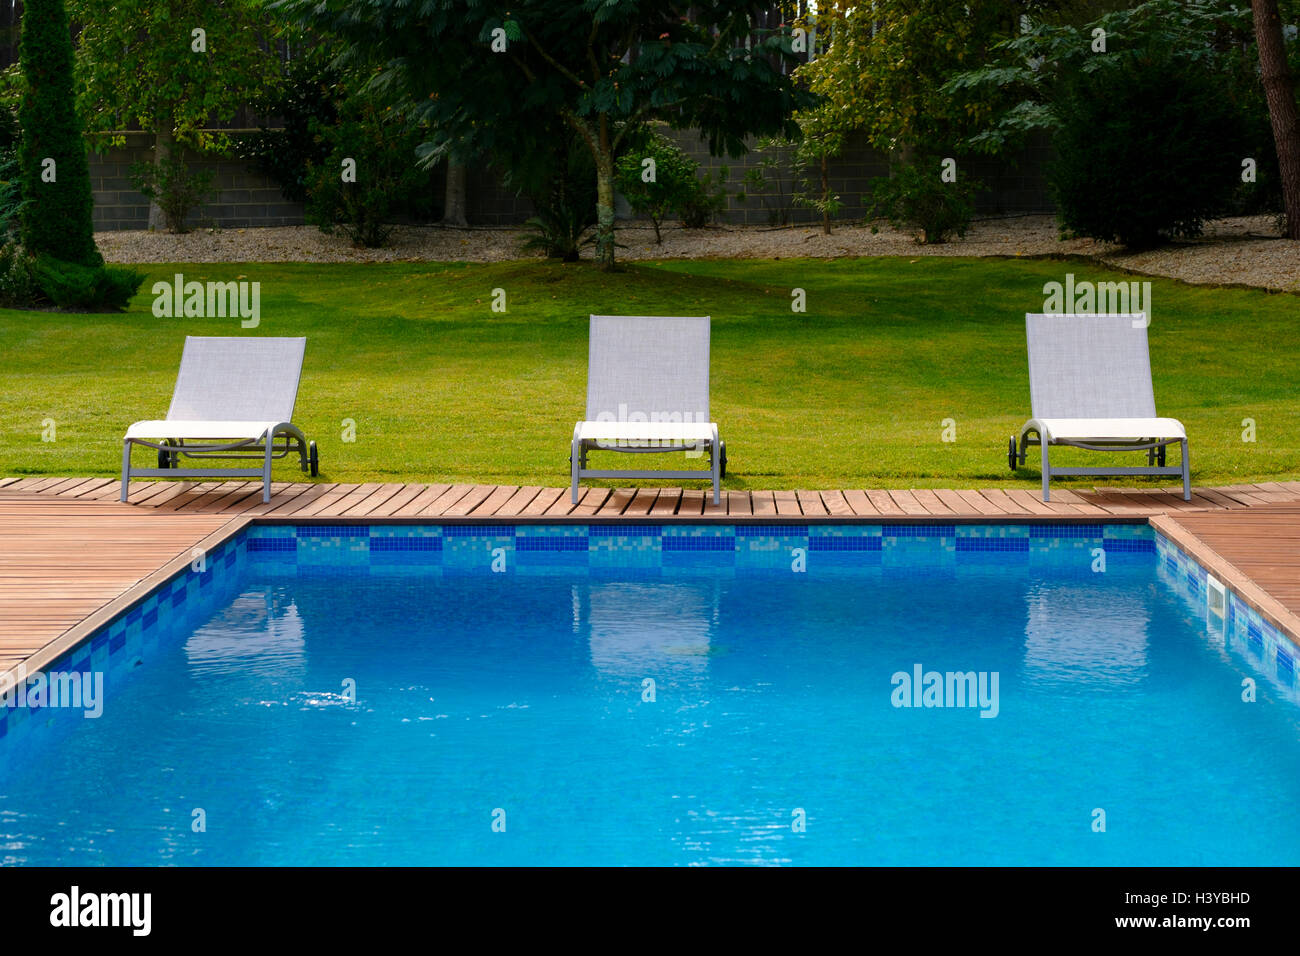 Sun loungers on wooden deck next to an outdoor swimming pool Stock Photo